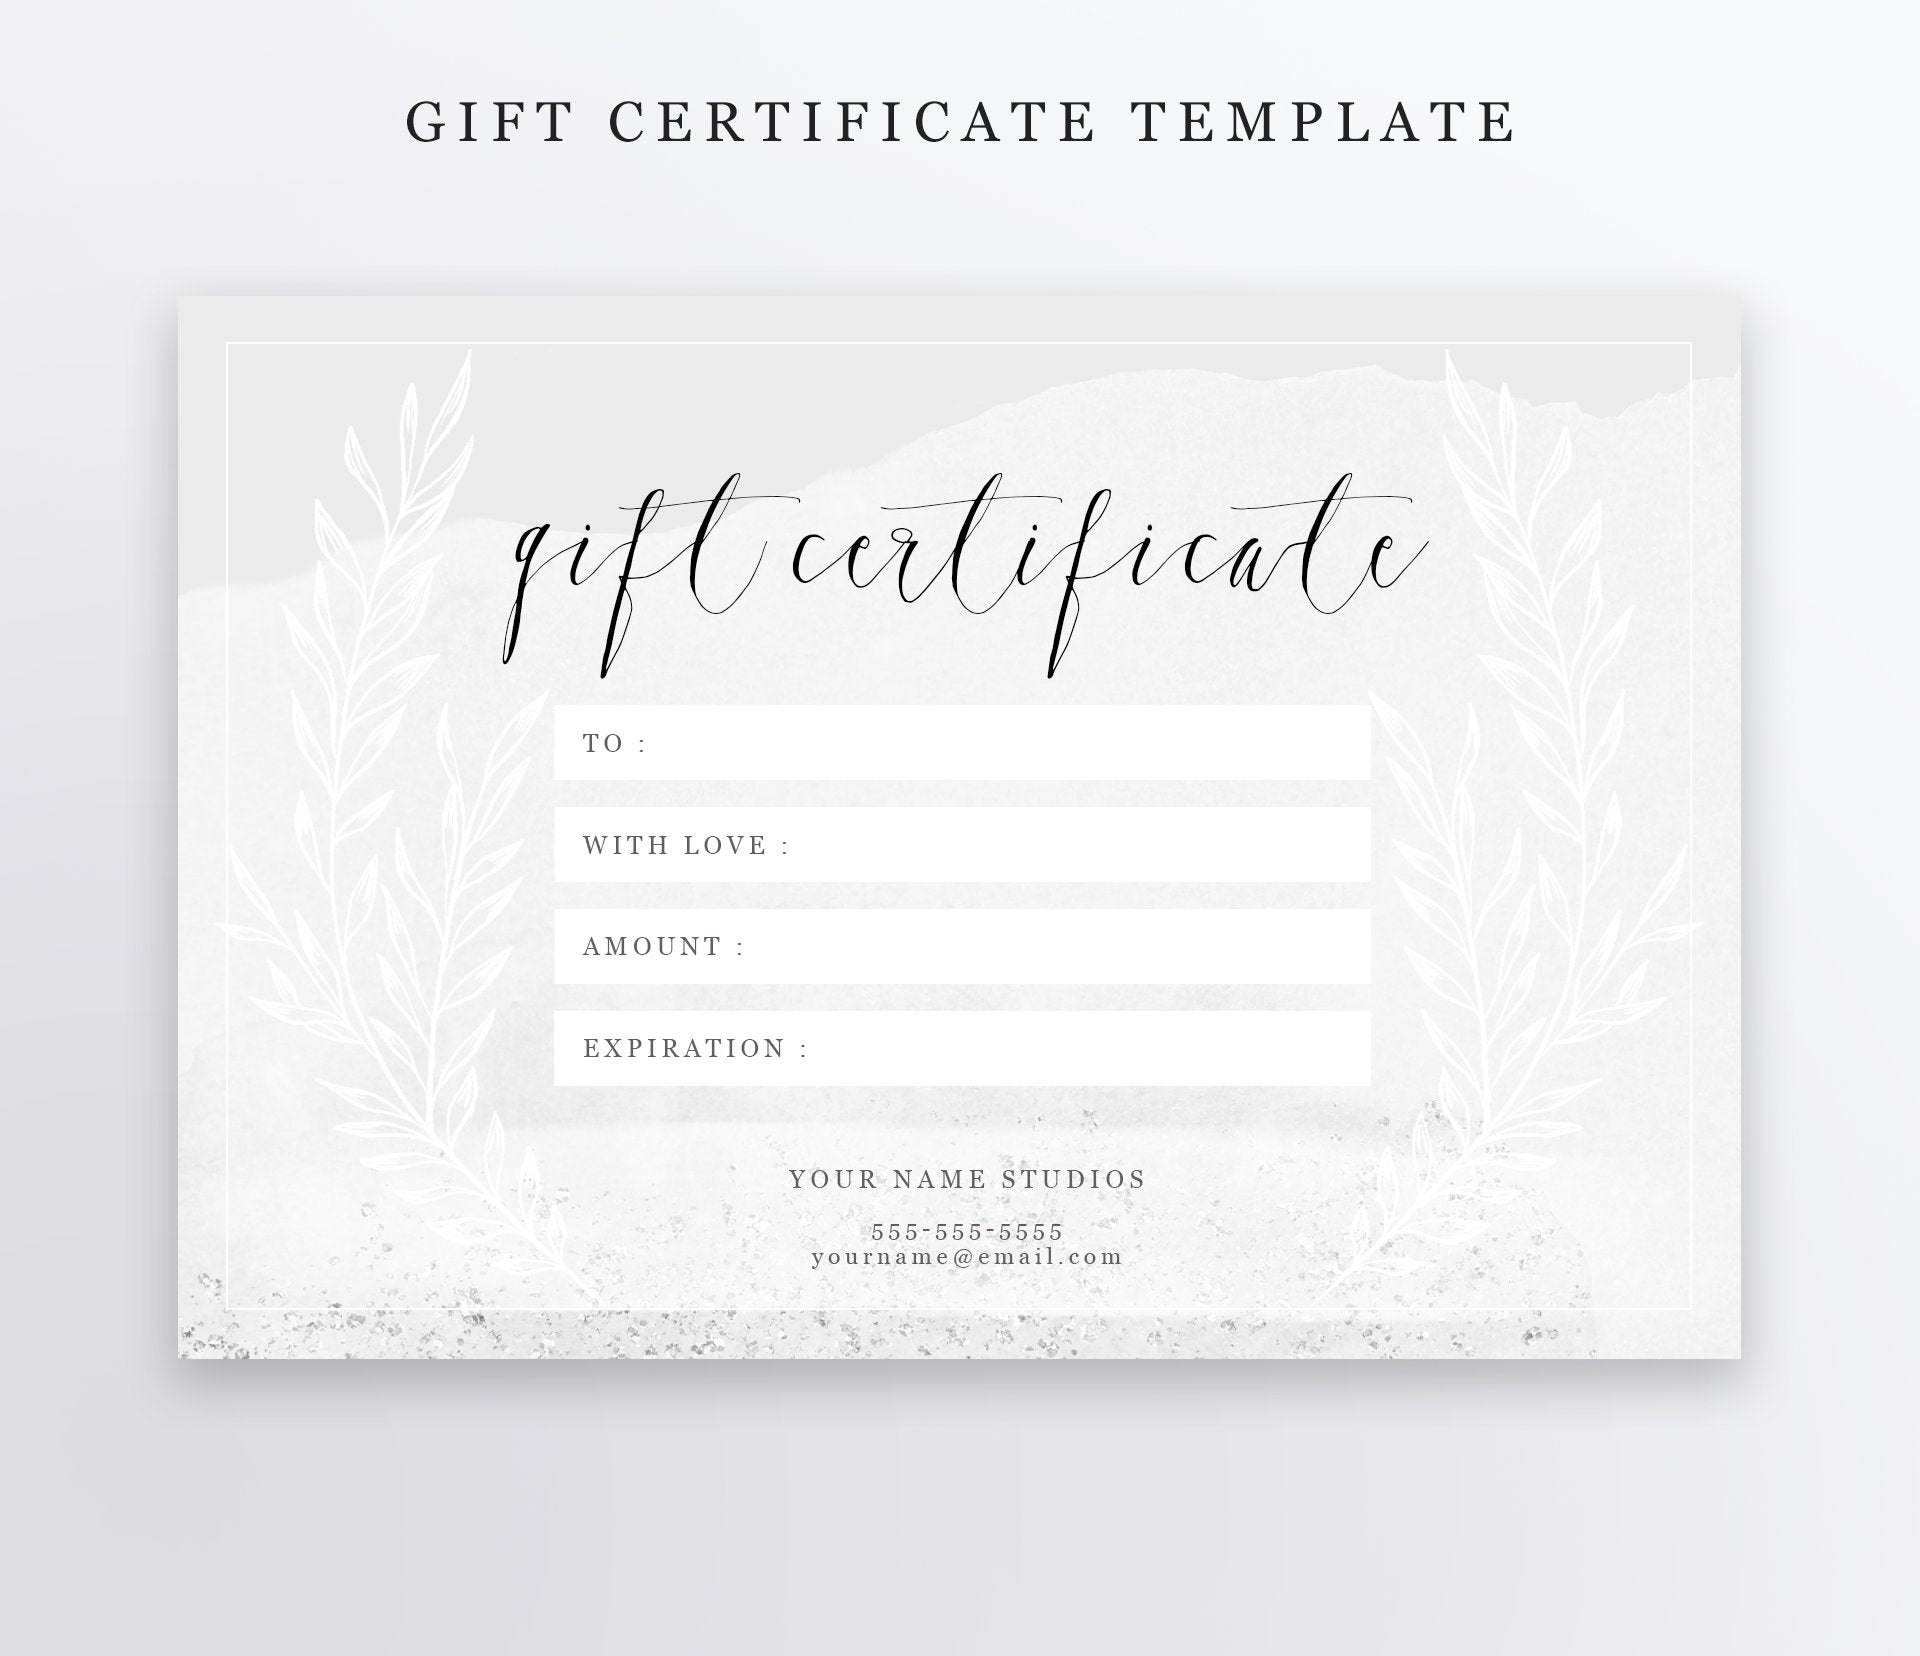 Photography Gift Certificate Template Psd X Editable  Etsy inside Photoshoot Gift Certificate Template